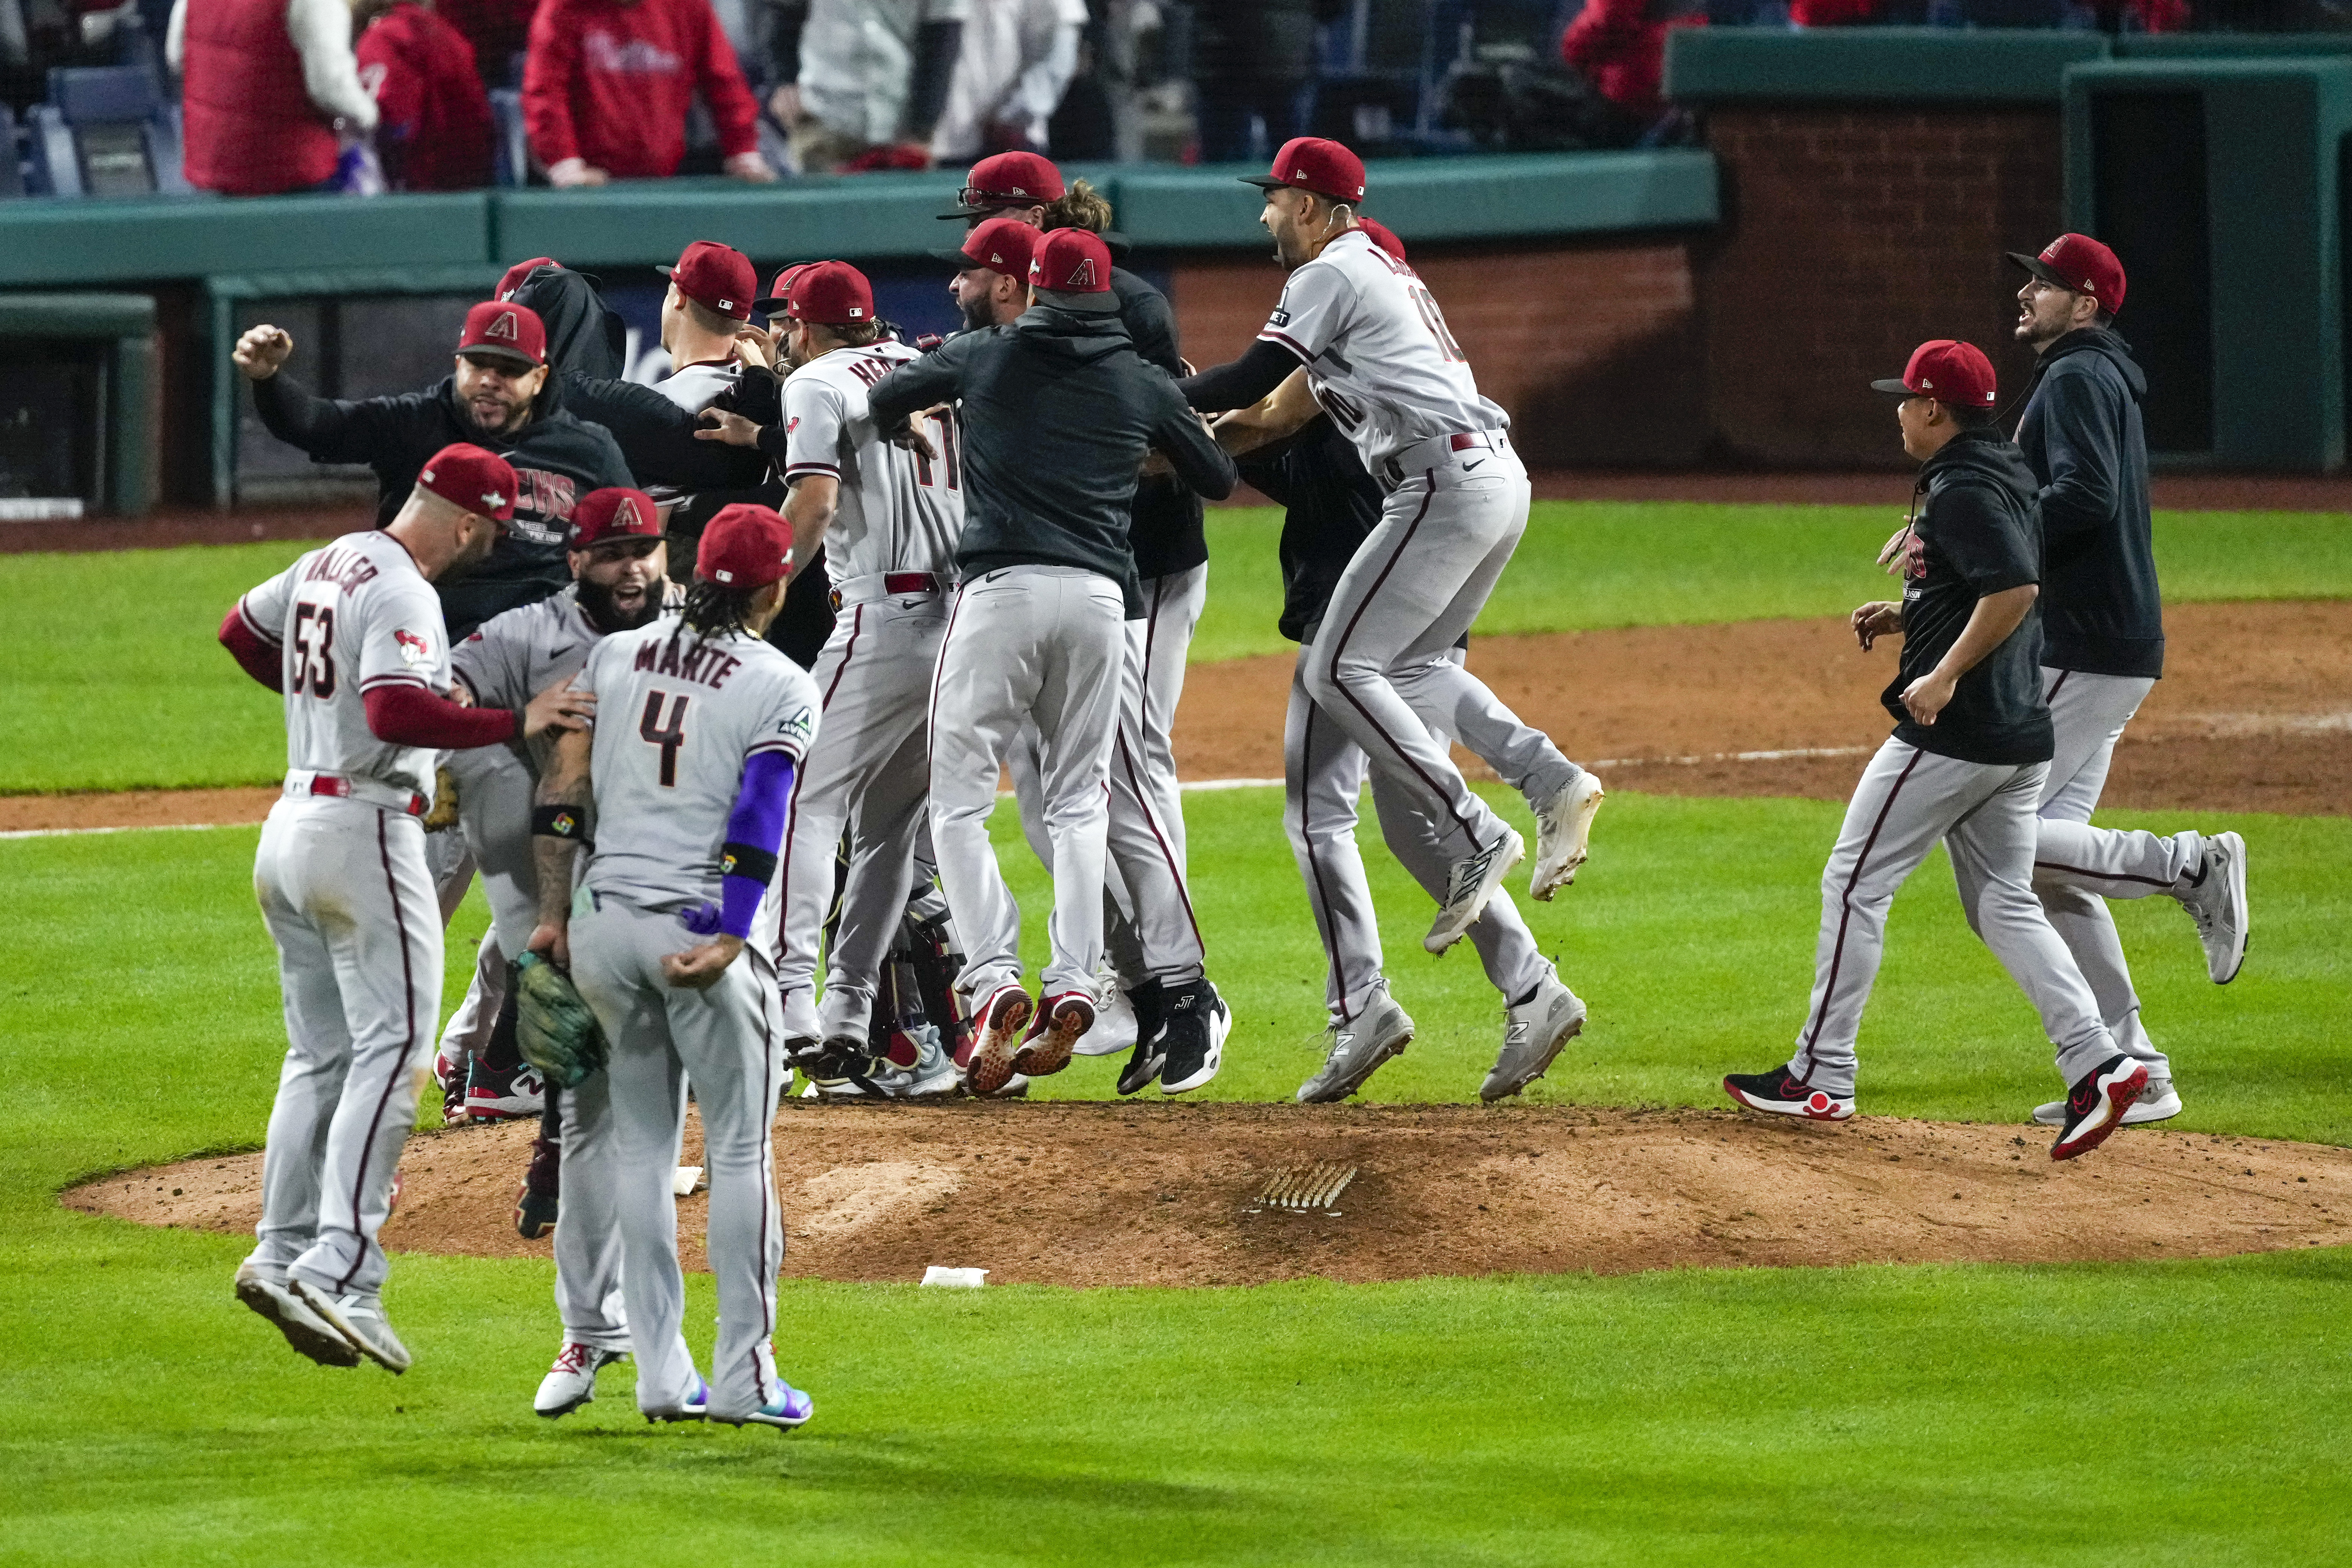 Phillies down in World Series